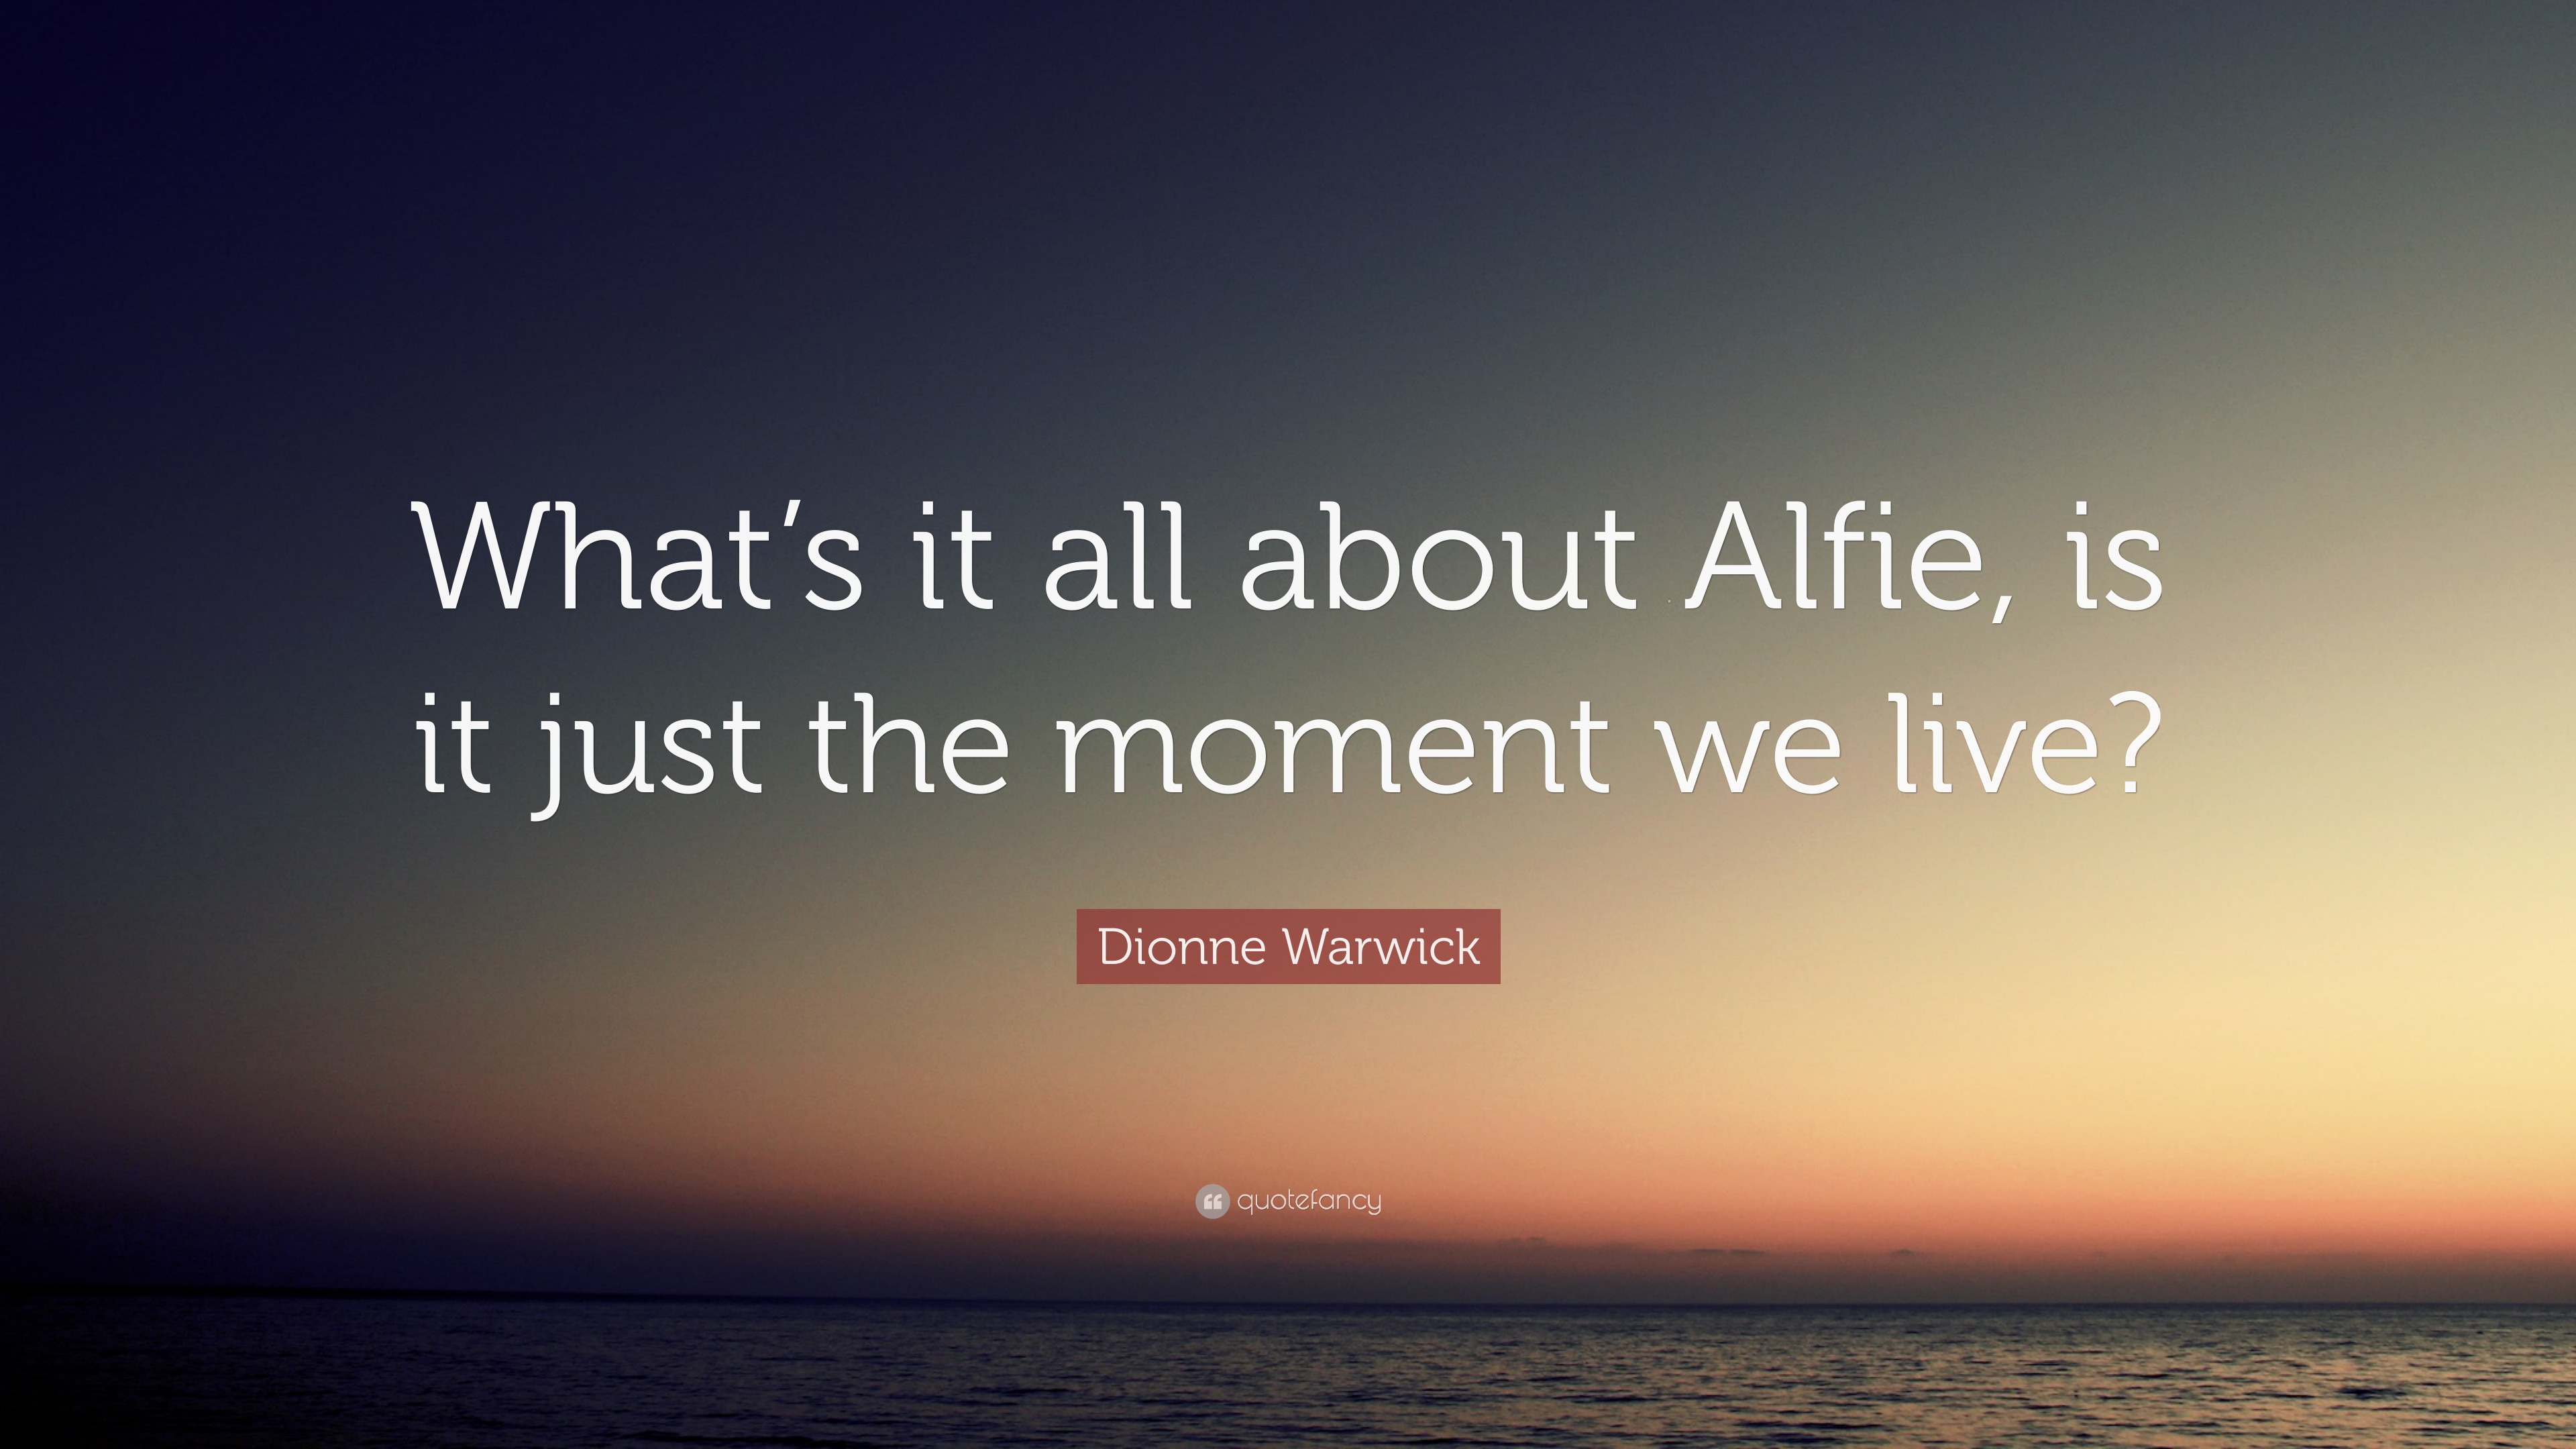 Dionne Warwick Quote: “What's it all about Alfie